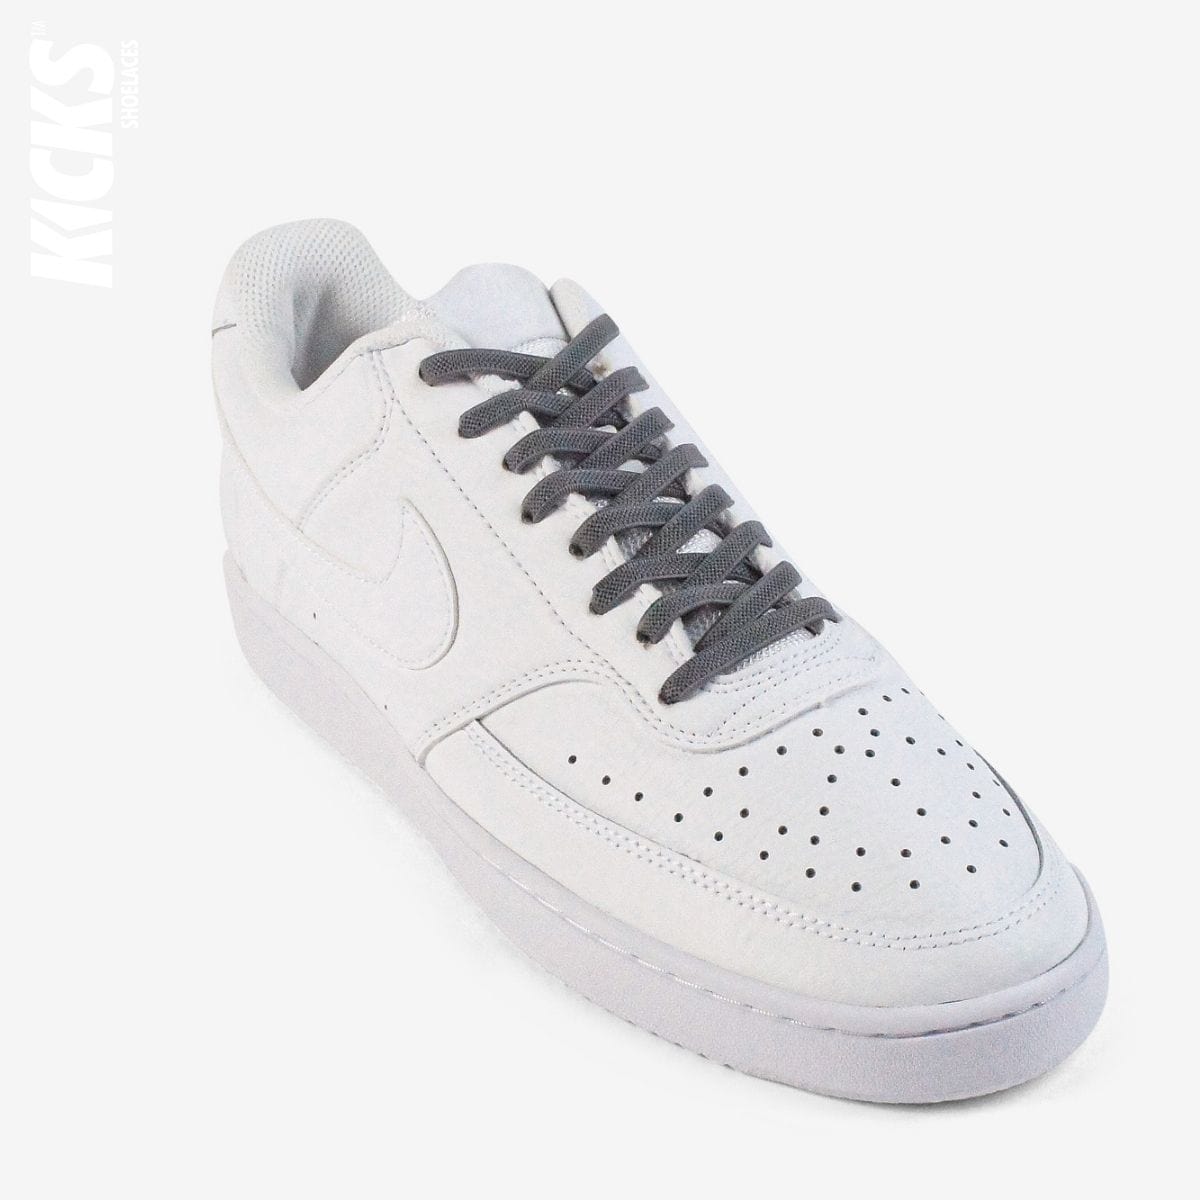 no-tie-shoelaces-with-dark-grey-laces-on-nike-white-sneakers-by-kicks-shoelaces